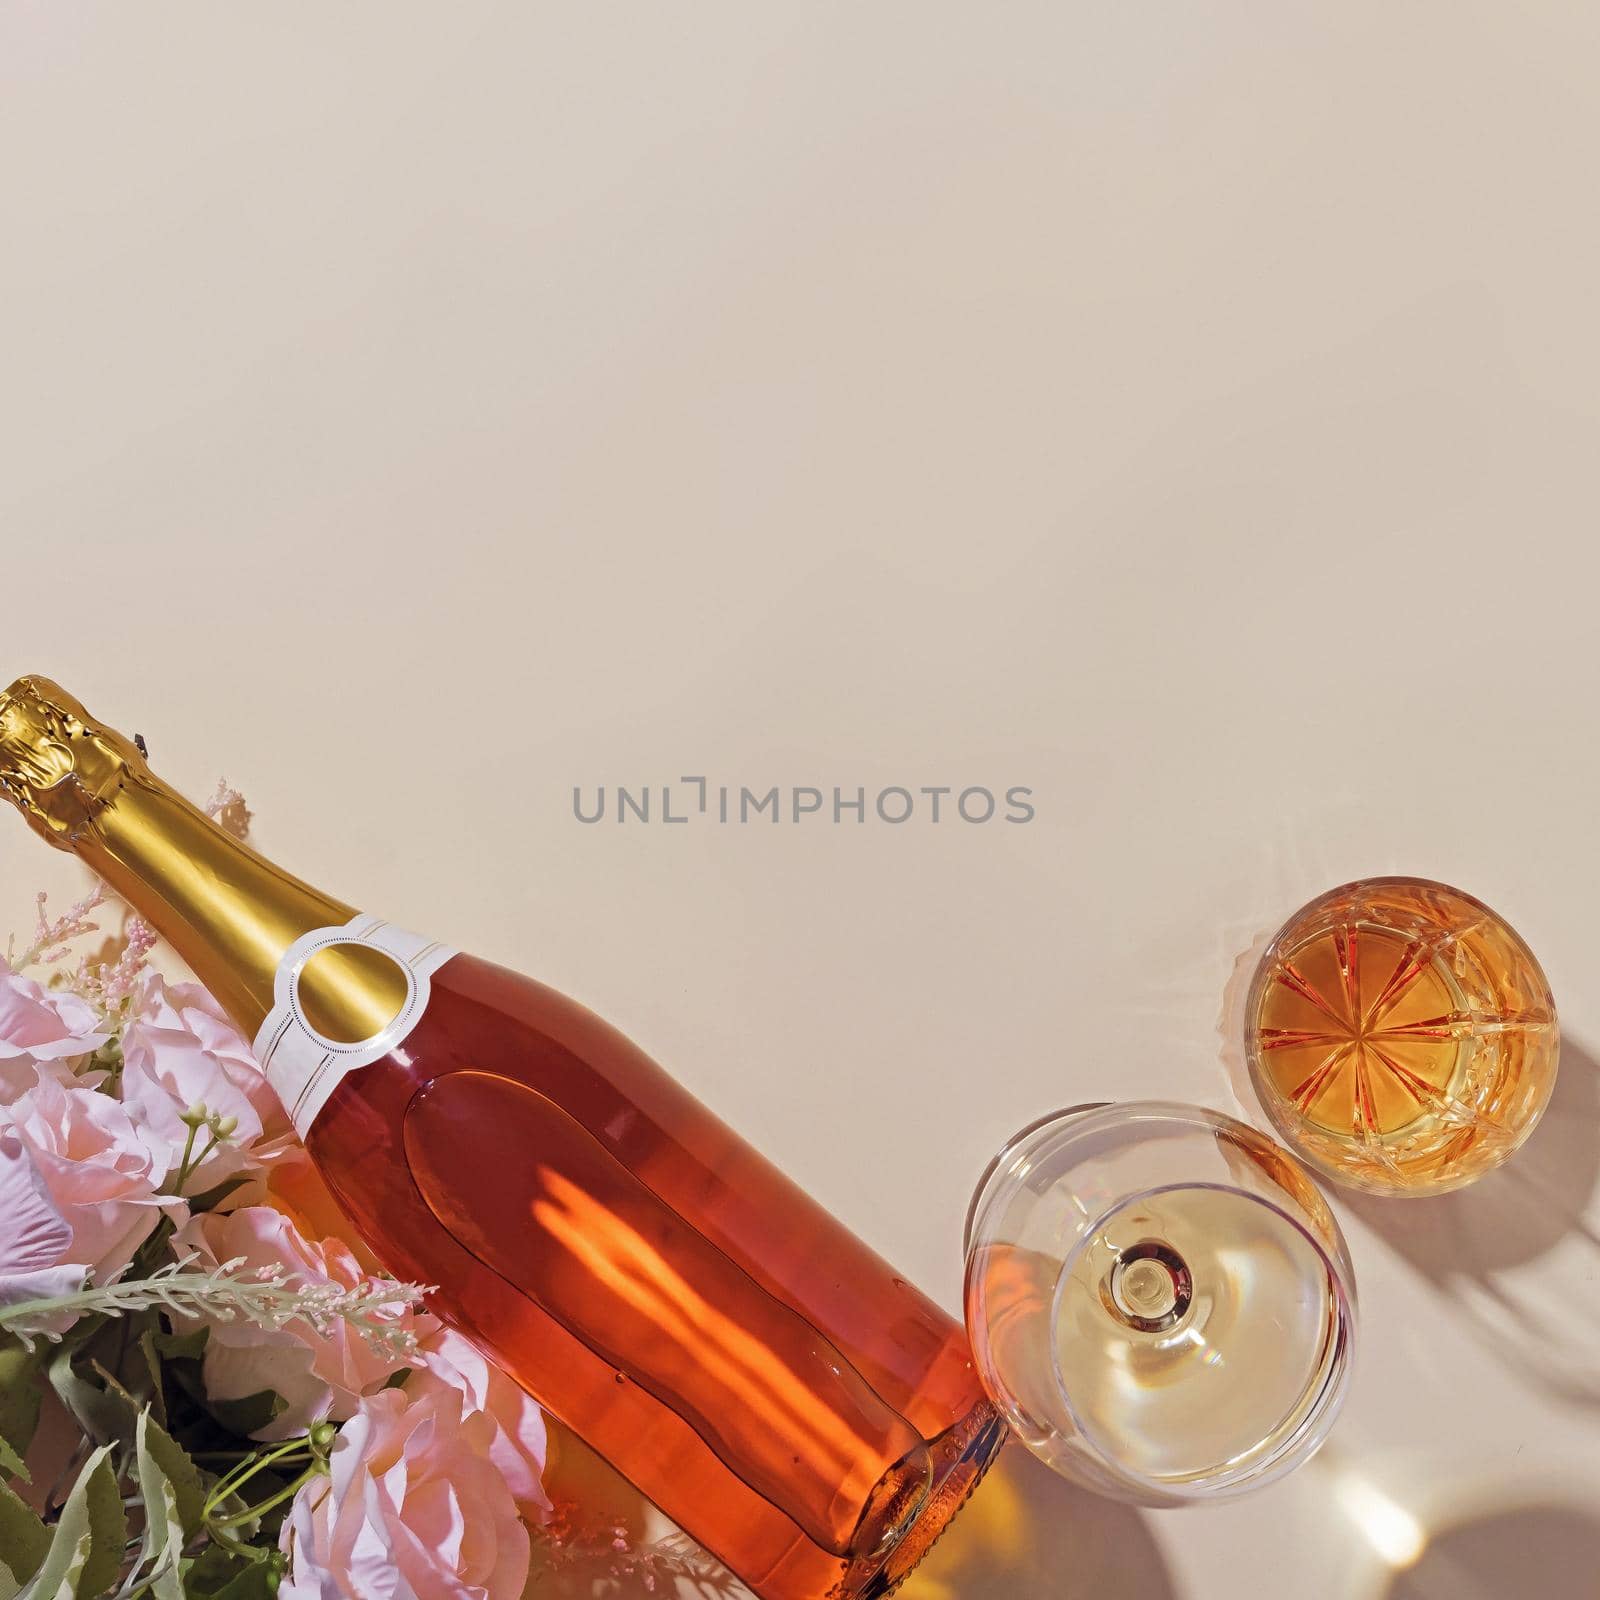 Festive arrangement with flowers and a bottle of champagne by sergii_gnatiuk